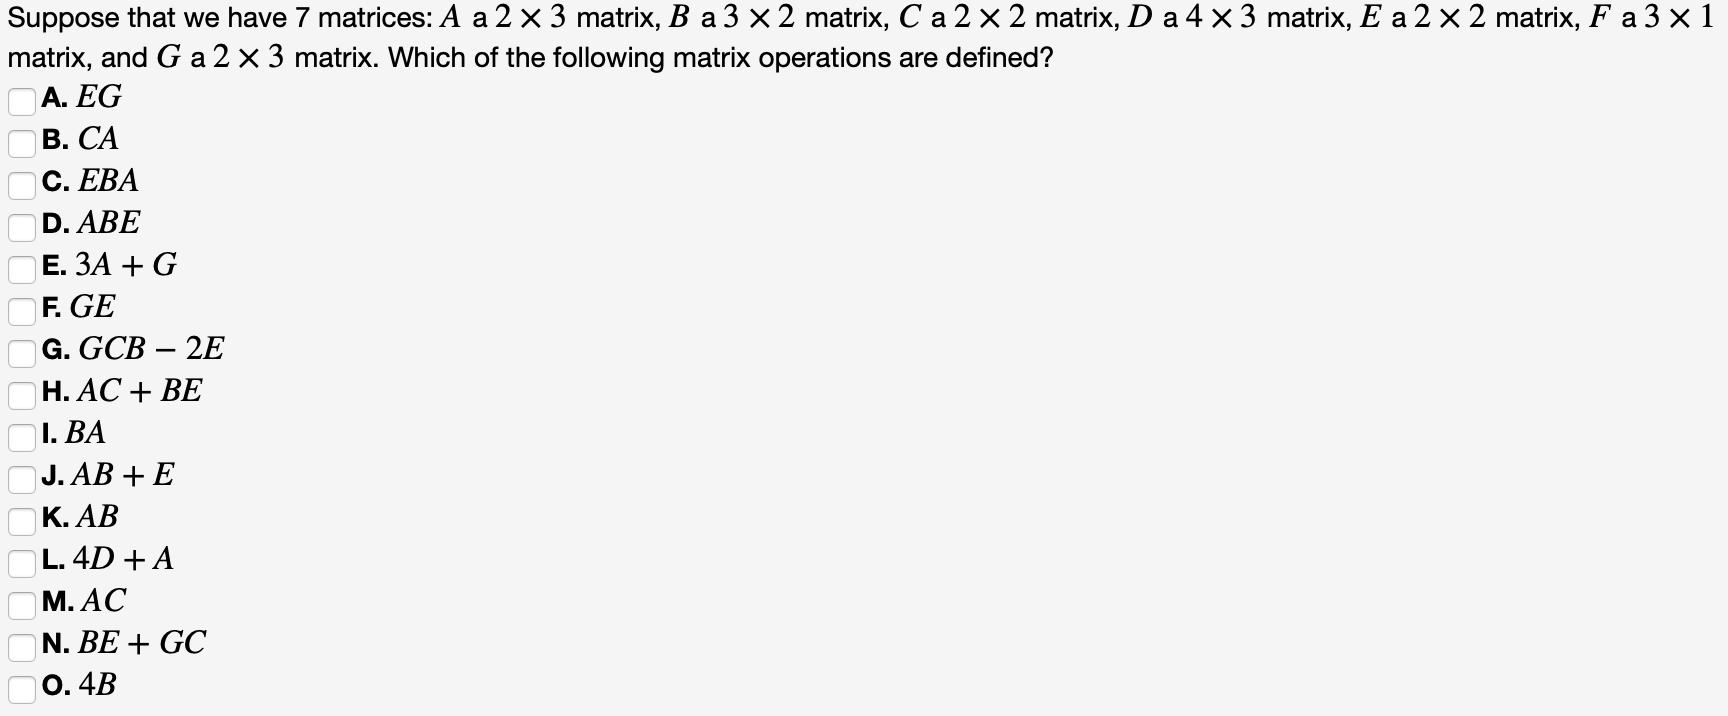 Suppose that we have 7 matrices: A a 2 x 3 matrix, B a 3 x 2 matrix, C a 2 x 2 matrix, D a 4 ×3 matrix, E a 2 × 2 matrix, F a 3 x 1
matrix, and G a 2 x 3 matrix. Which of the following matrix operations are defined?
A. EG
B. CA
C. EBA
D. ABE
Е. ЗА + G
F. GE
G. GCB – 2E
Н. АС + BЕ
I. BA
J. AB + E
K. AB
L. 4D + A
M. AC
N. BE + GC
0. 4B
